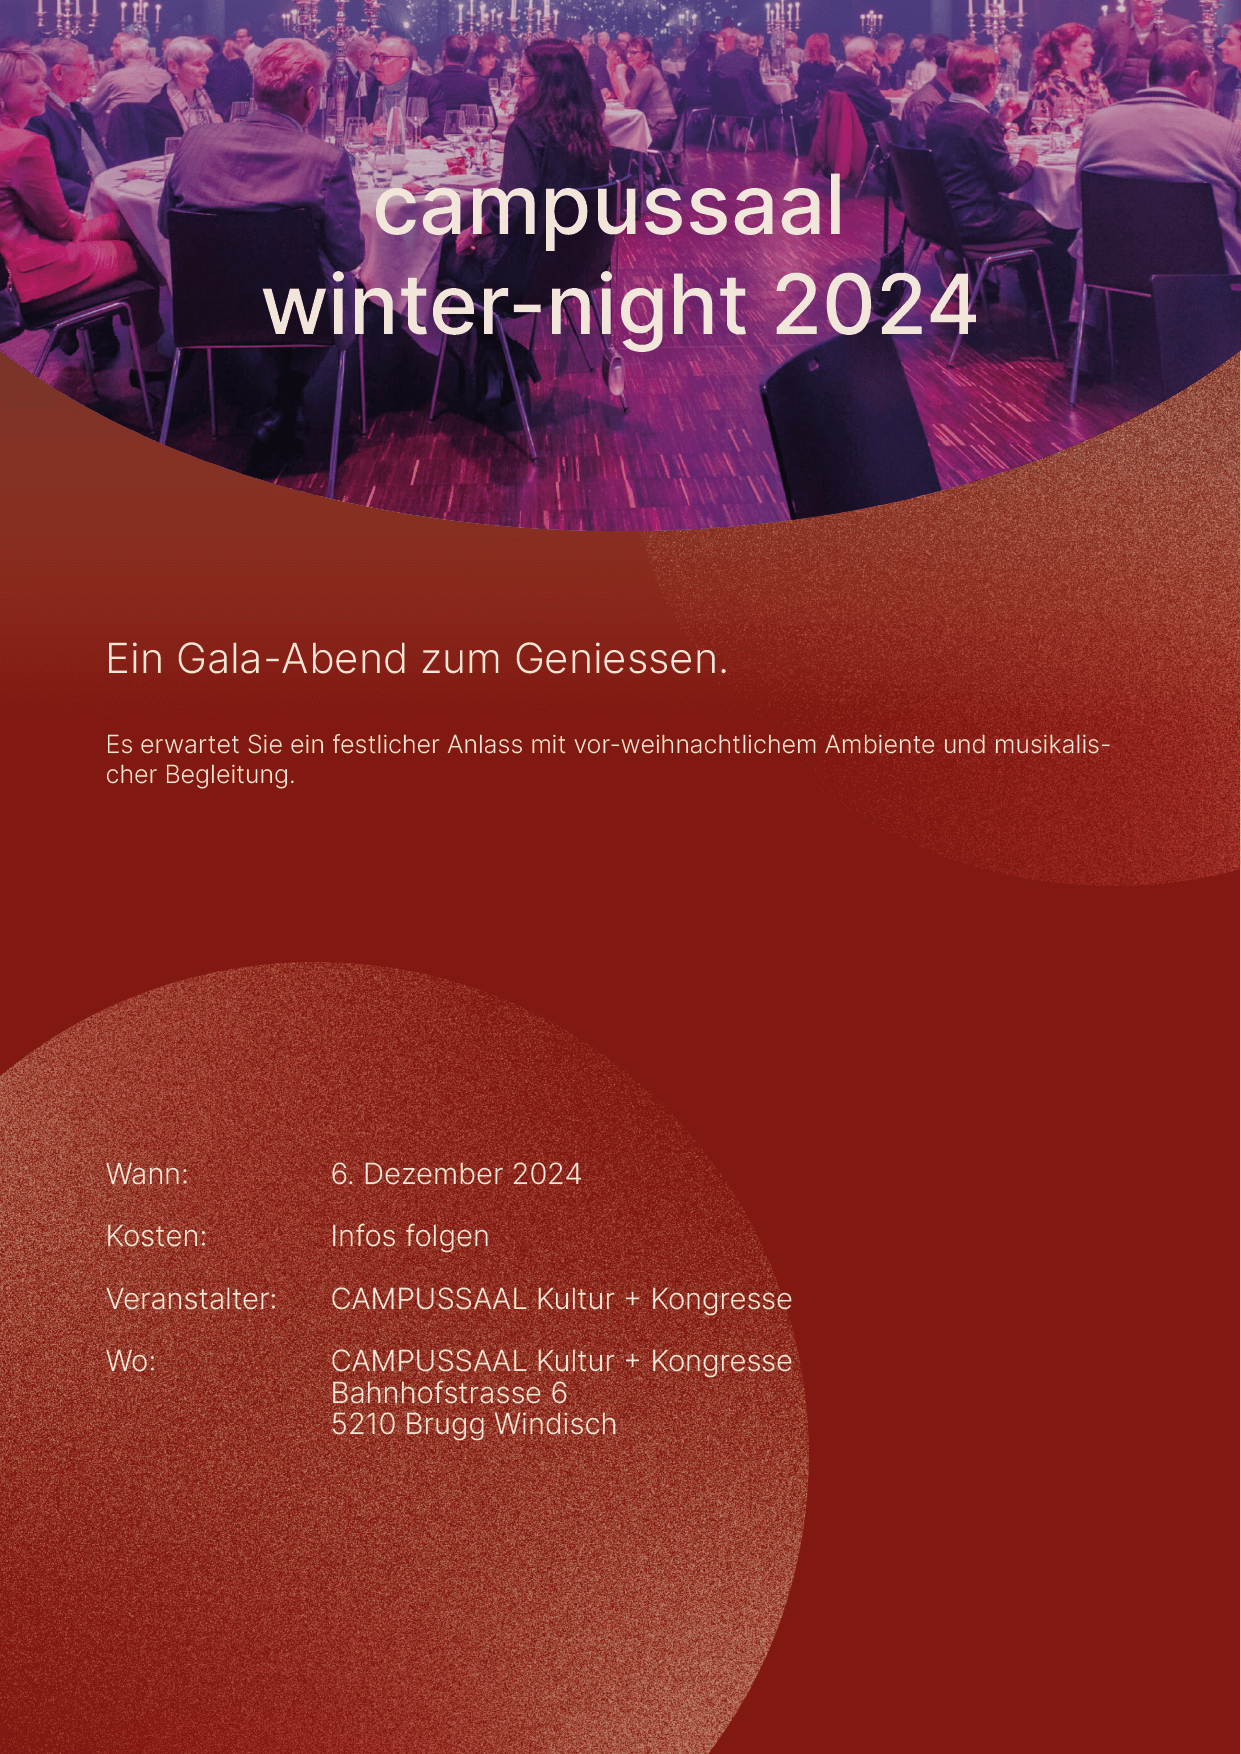 winter night 2024 flyer - CAMPUSSAAL